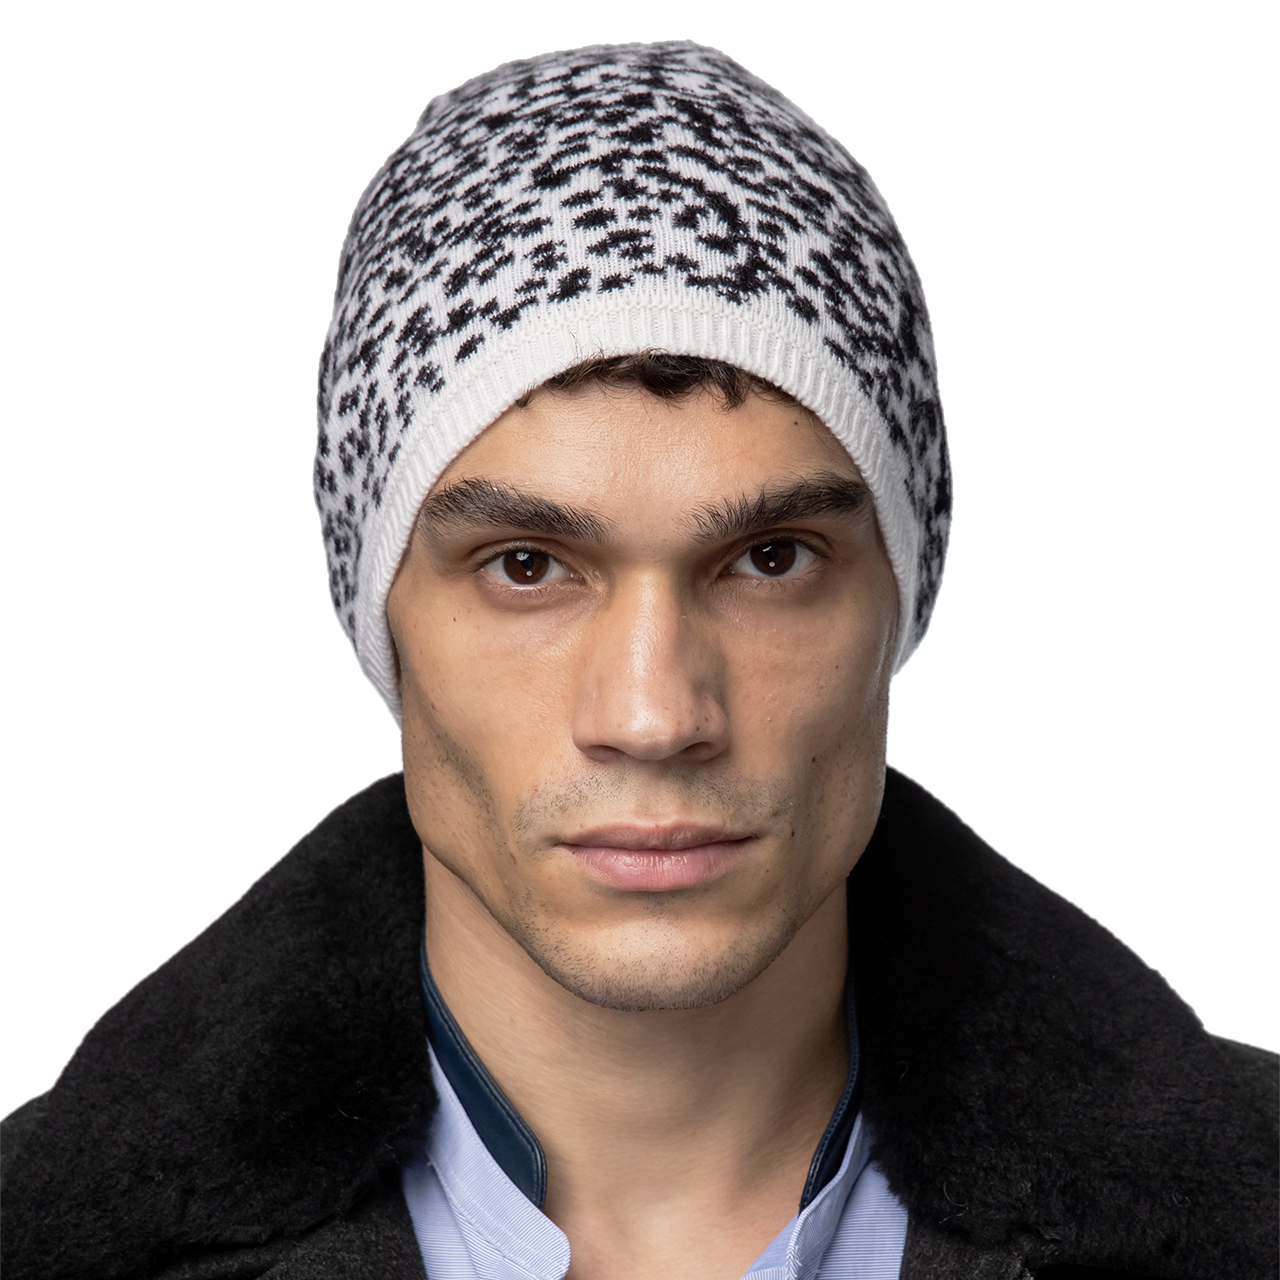 Cashmere Slouchy Beanie with Contrast Intarsia - Black/White